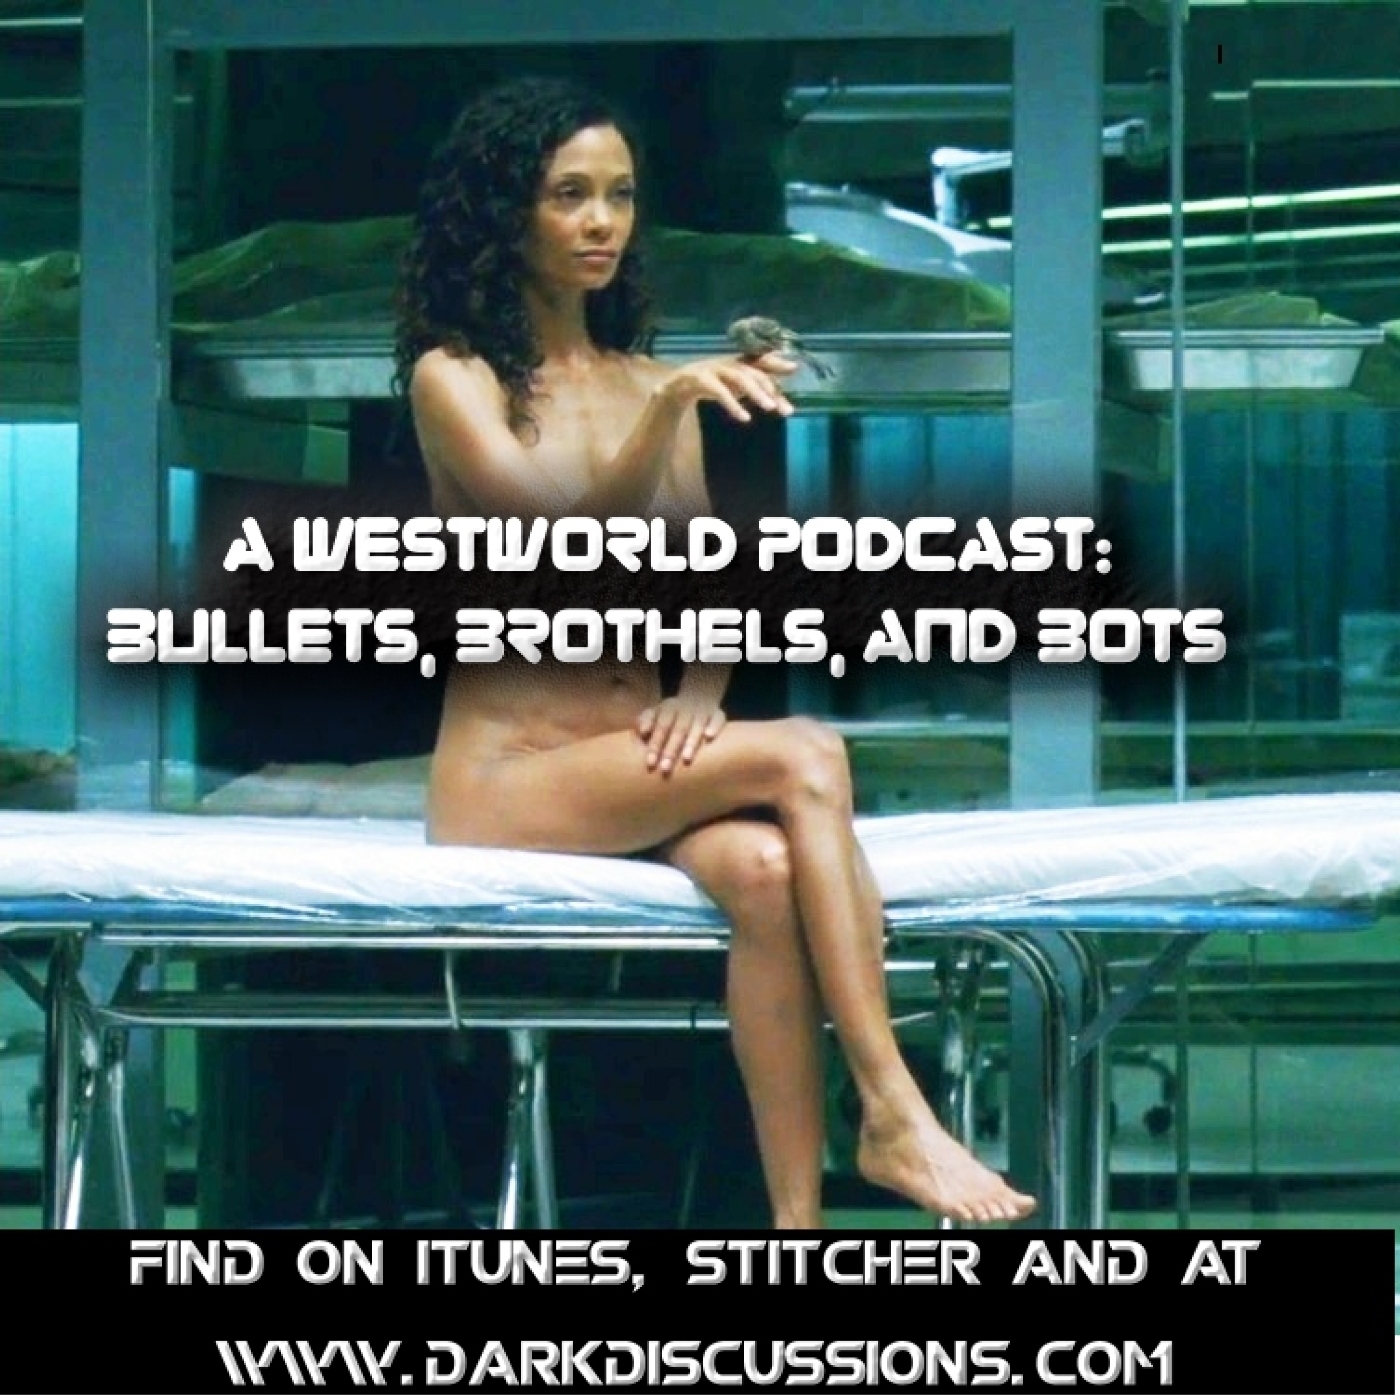 Artwork for podcast Bullets, Brothels, and Bots: A Westworld Podcast